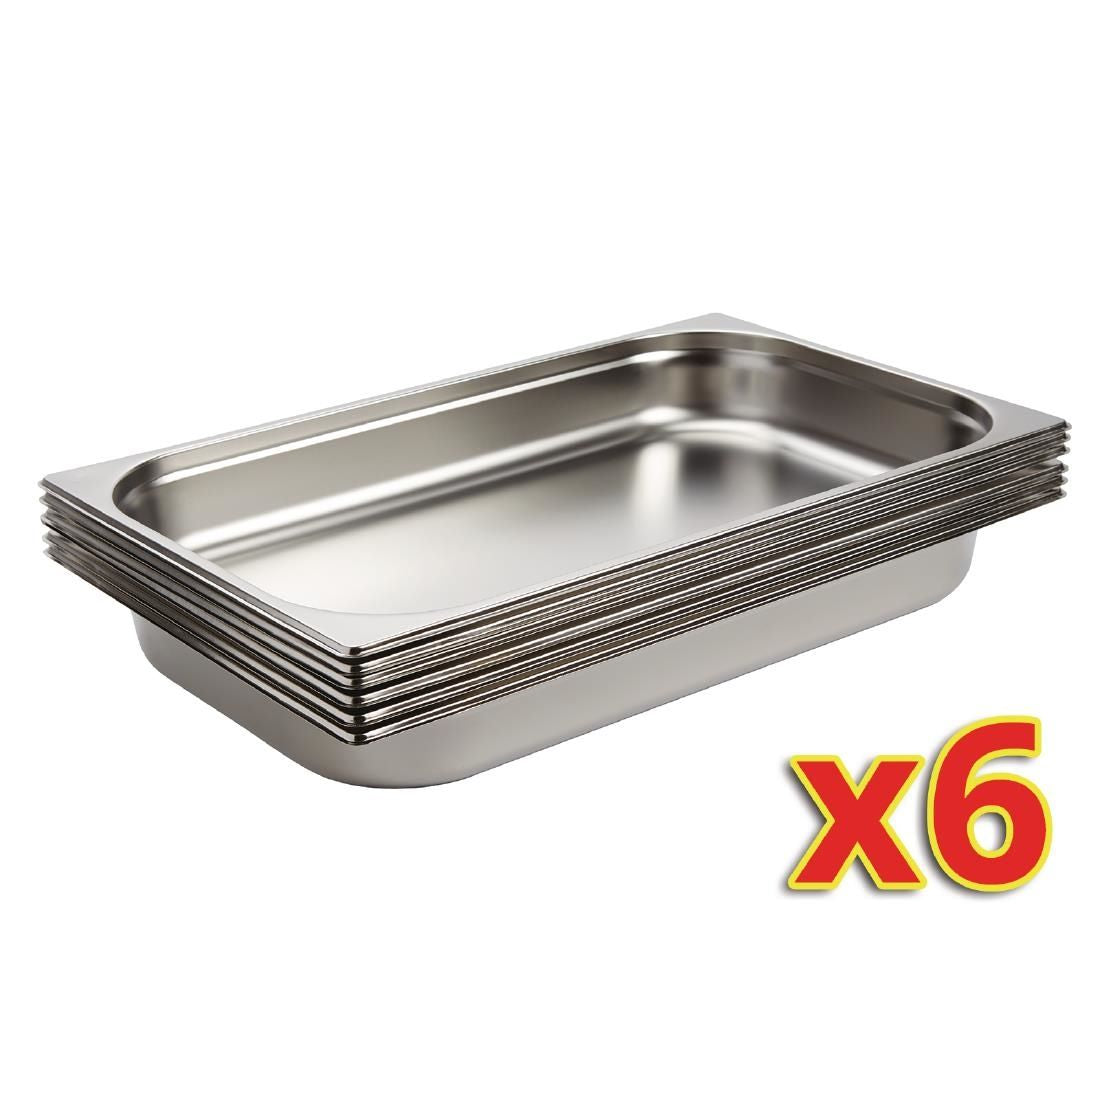 S895 Vogue Stainless Steel 1/1 Gastronorm Pans 65mm (Pack of 6)